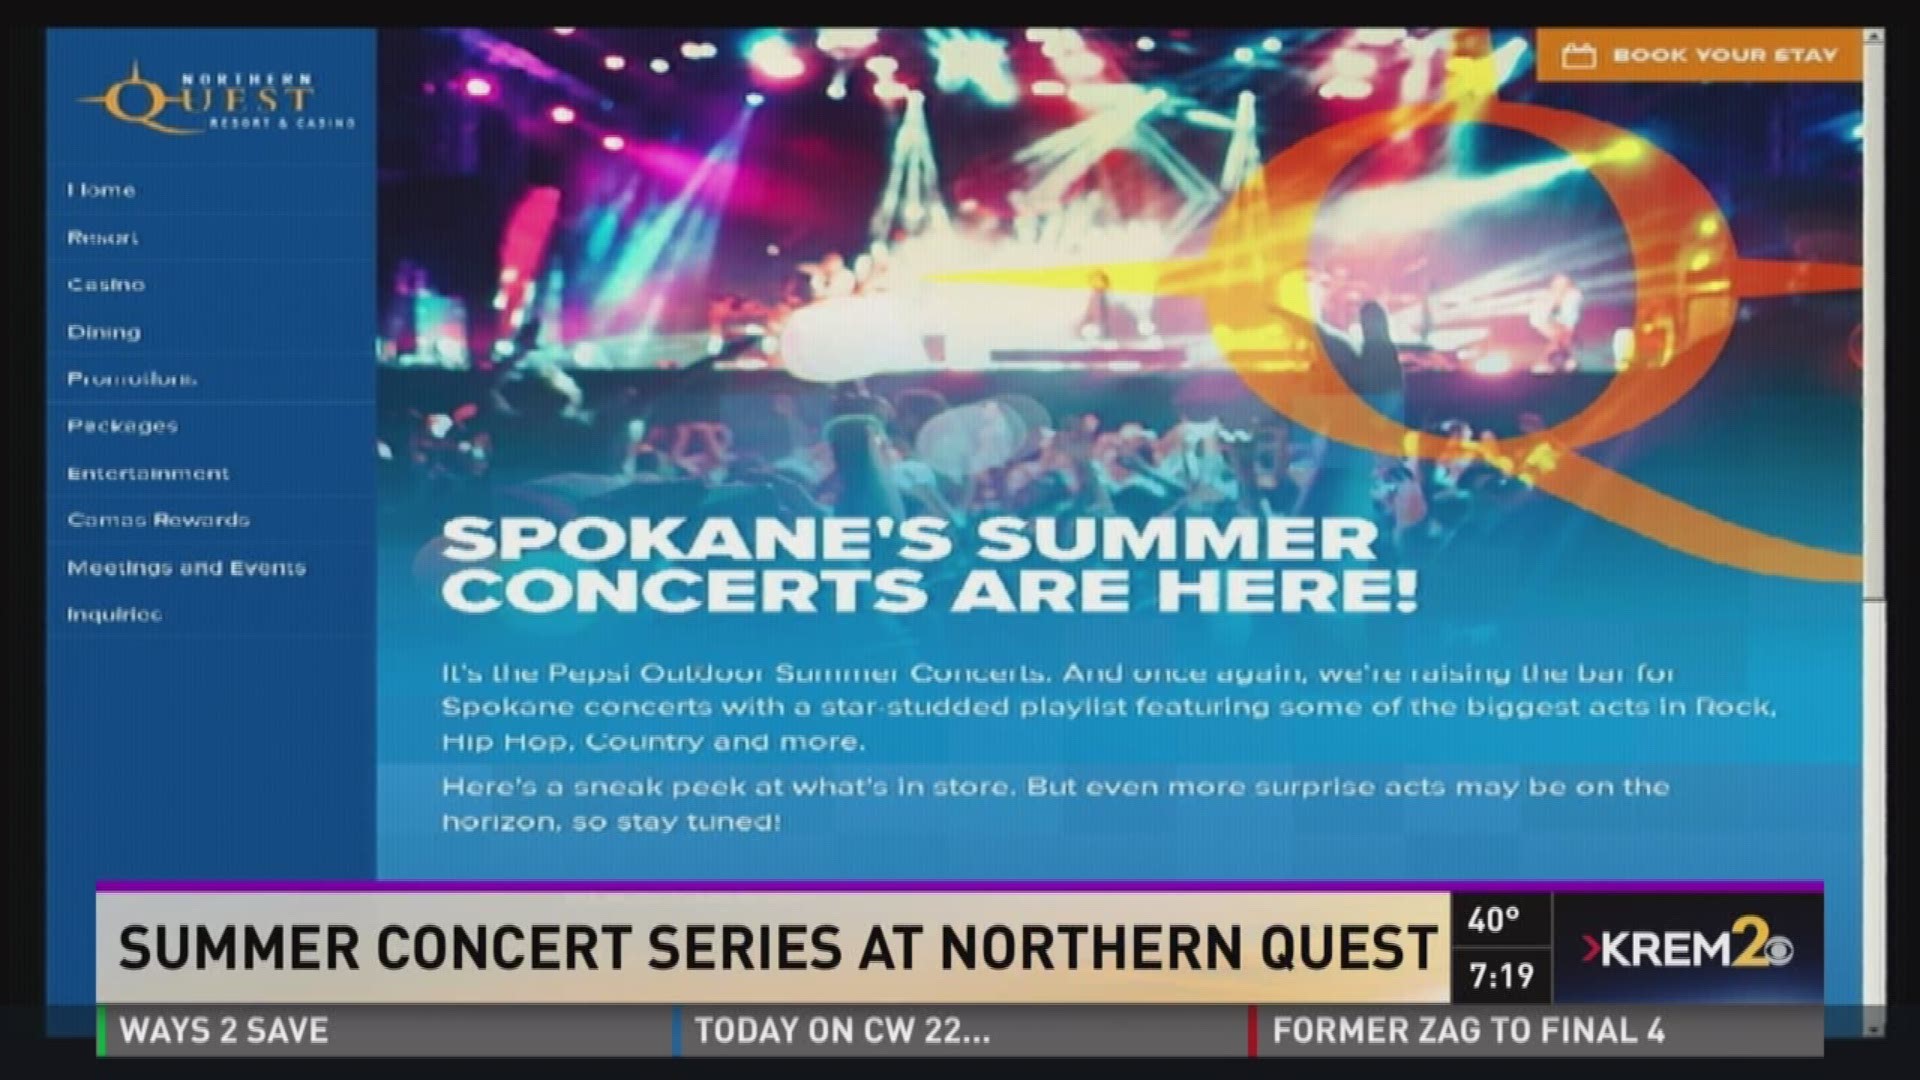 northern quest casino concerts 2019